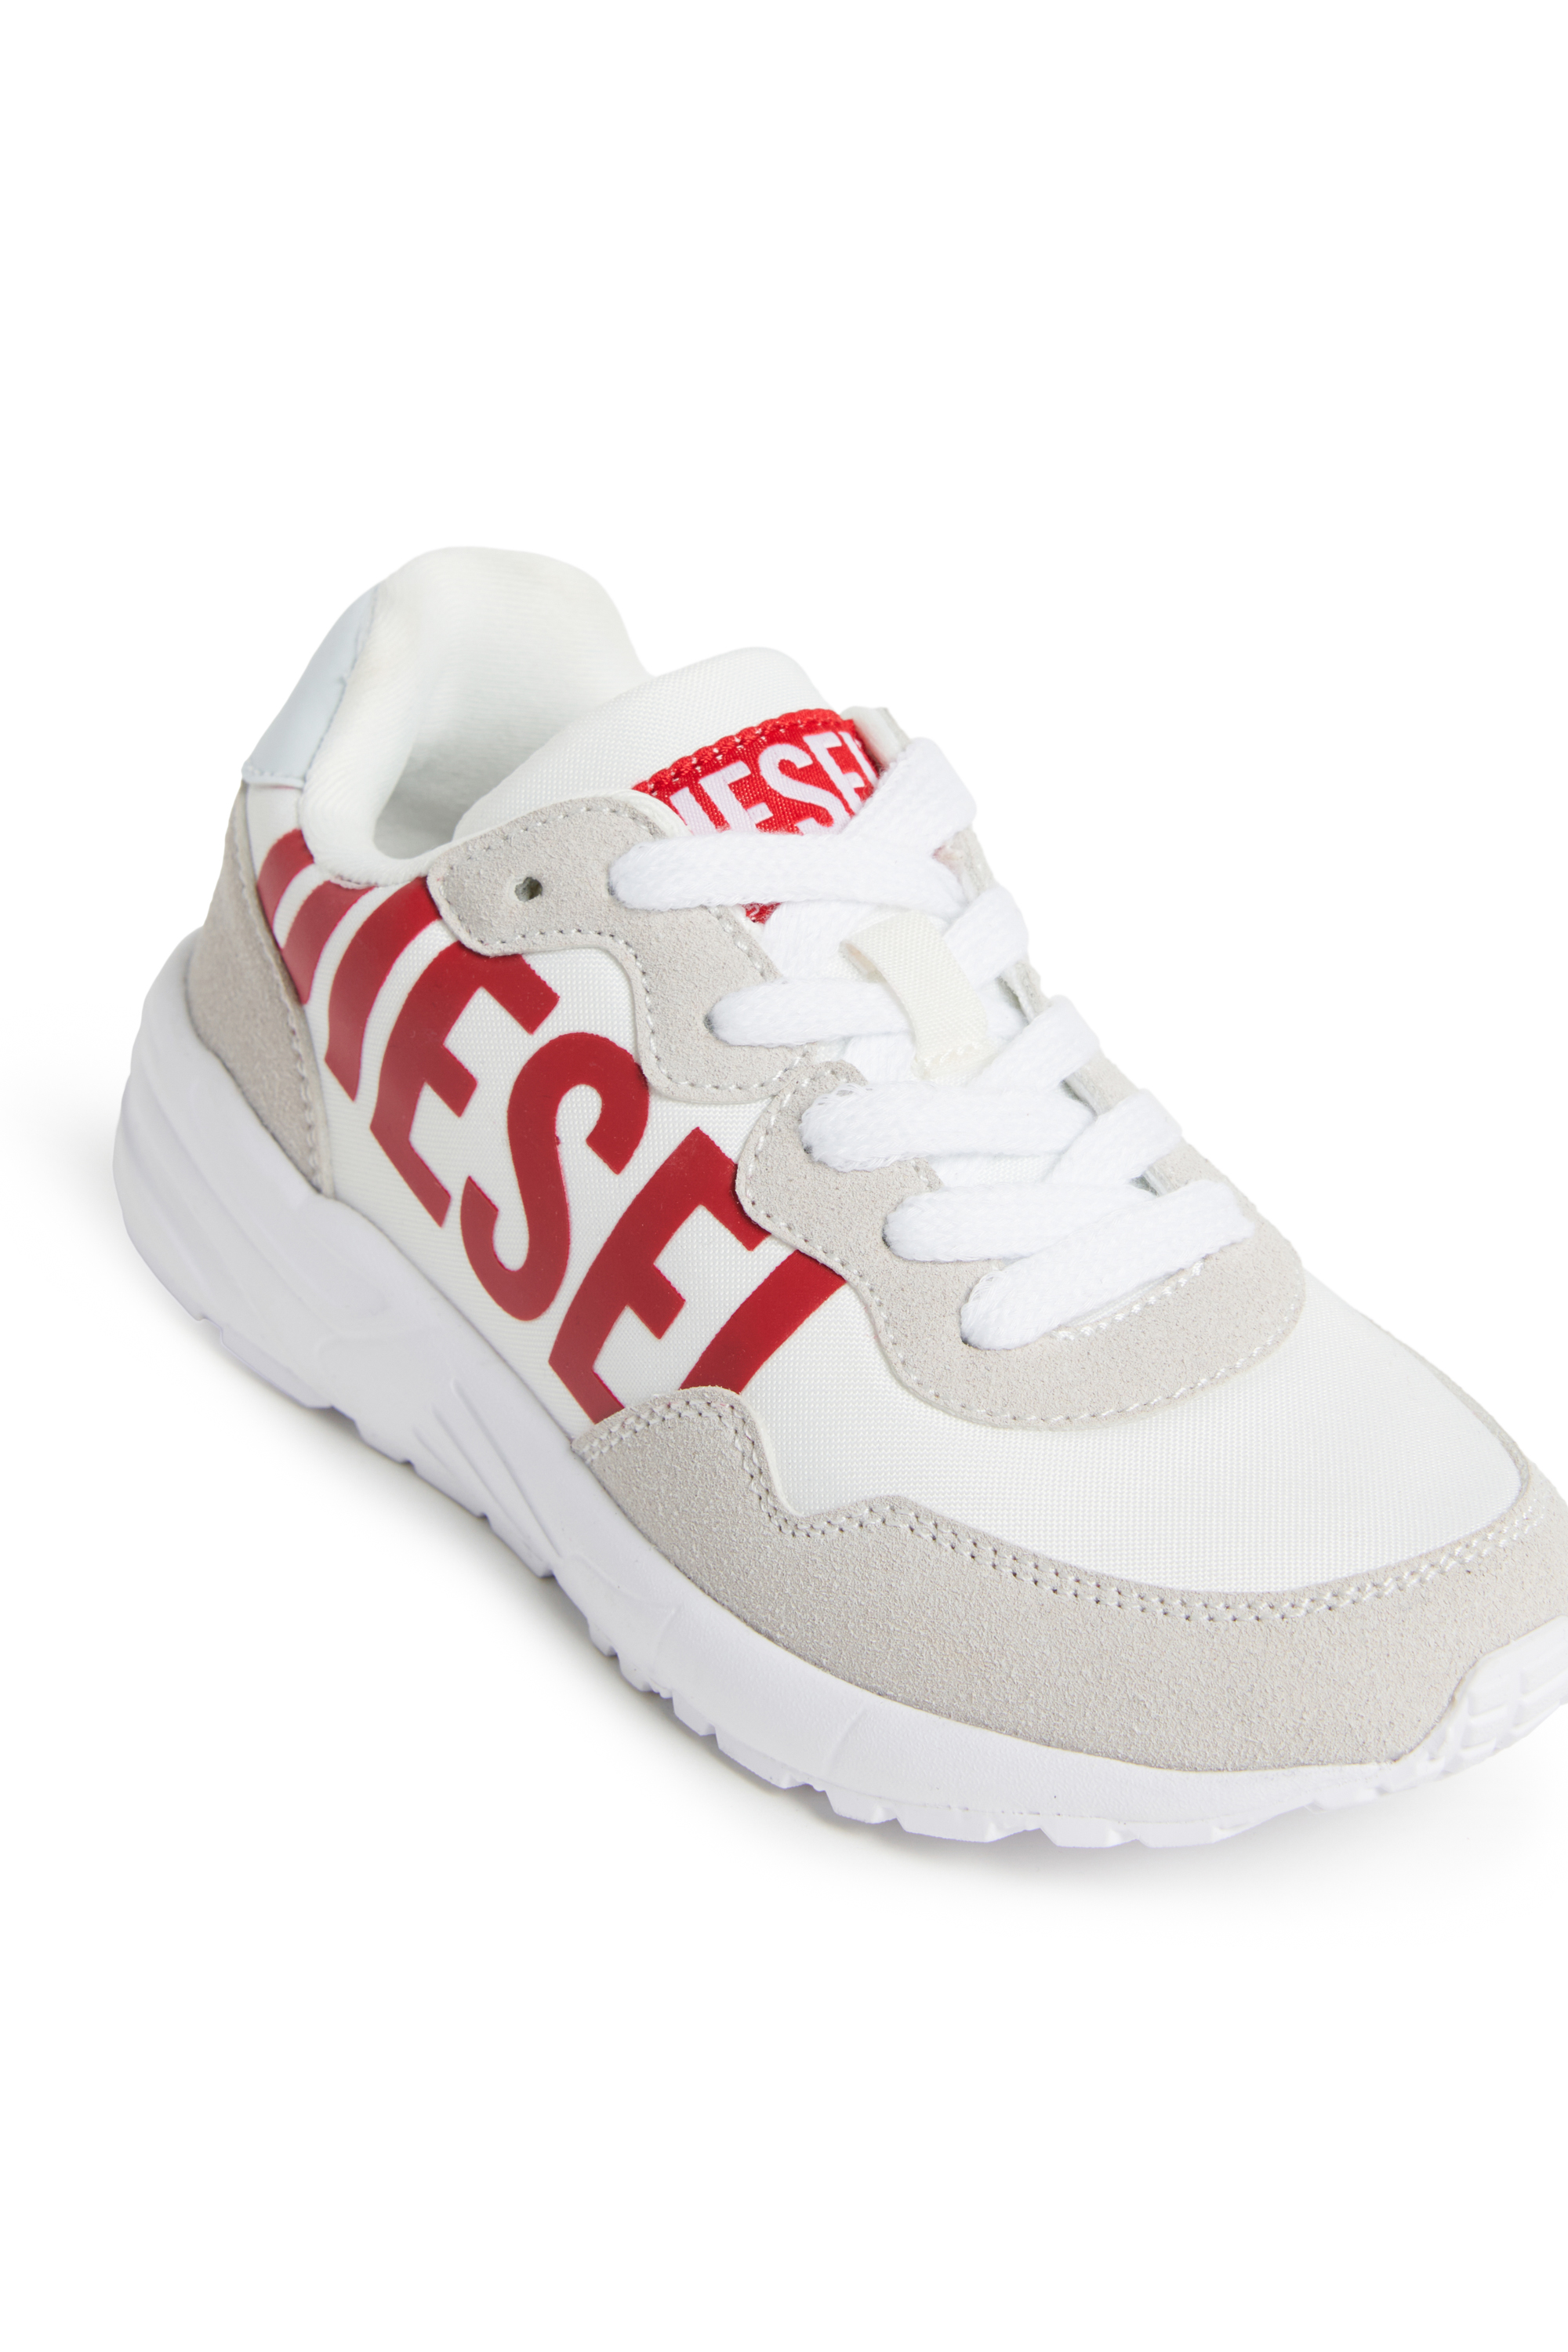 Diesel - S-STAR LIGHT LC, Unisex Nylon sneakers with shiny Diesel print in Multicolor - Image 5